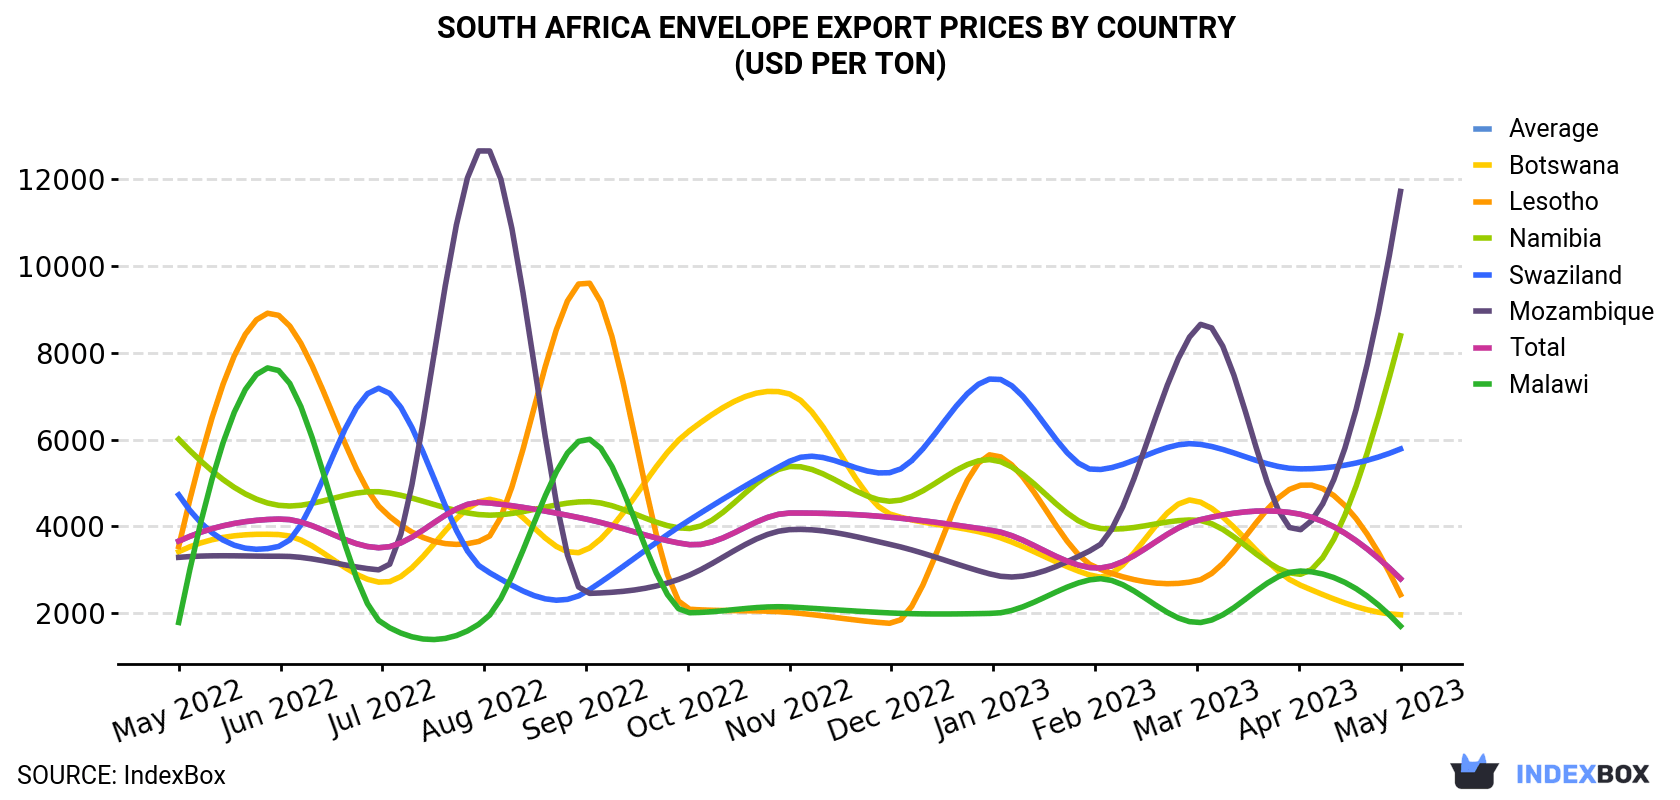 South Africa Envelope Export Prices By Country (USD Per Ton)